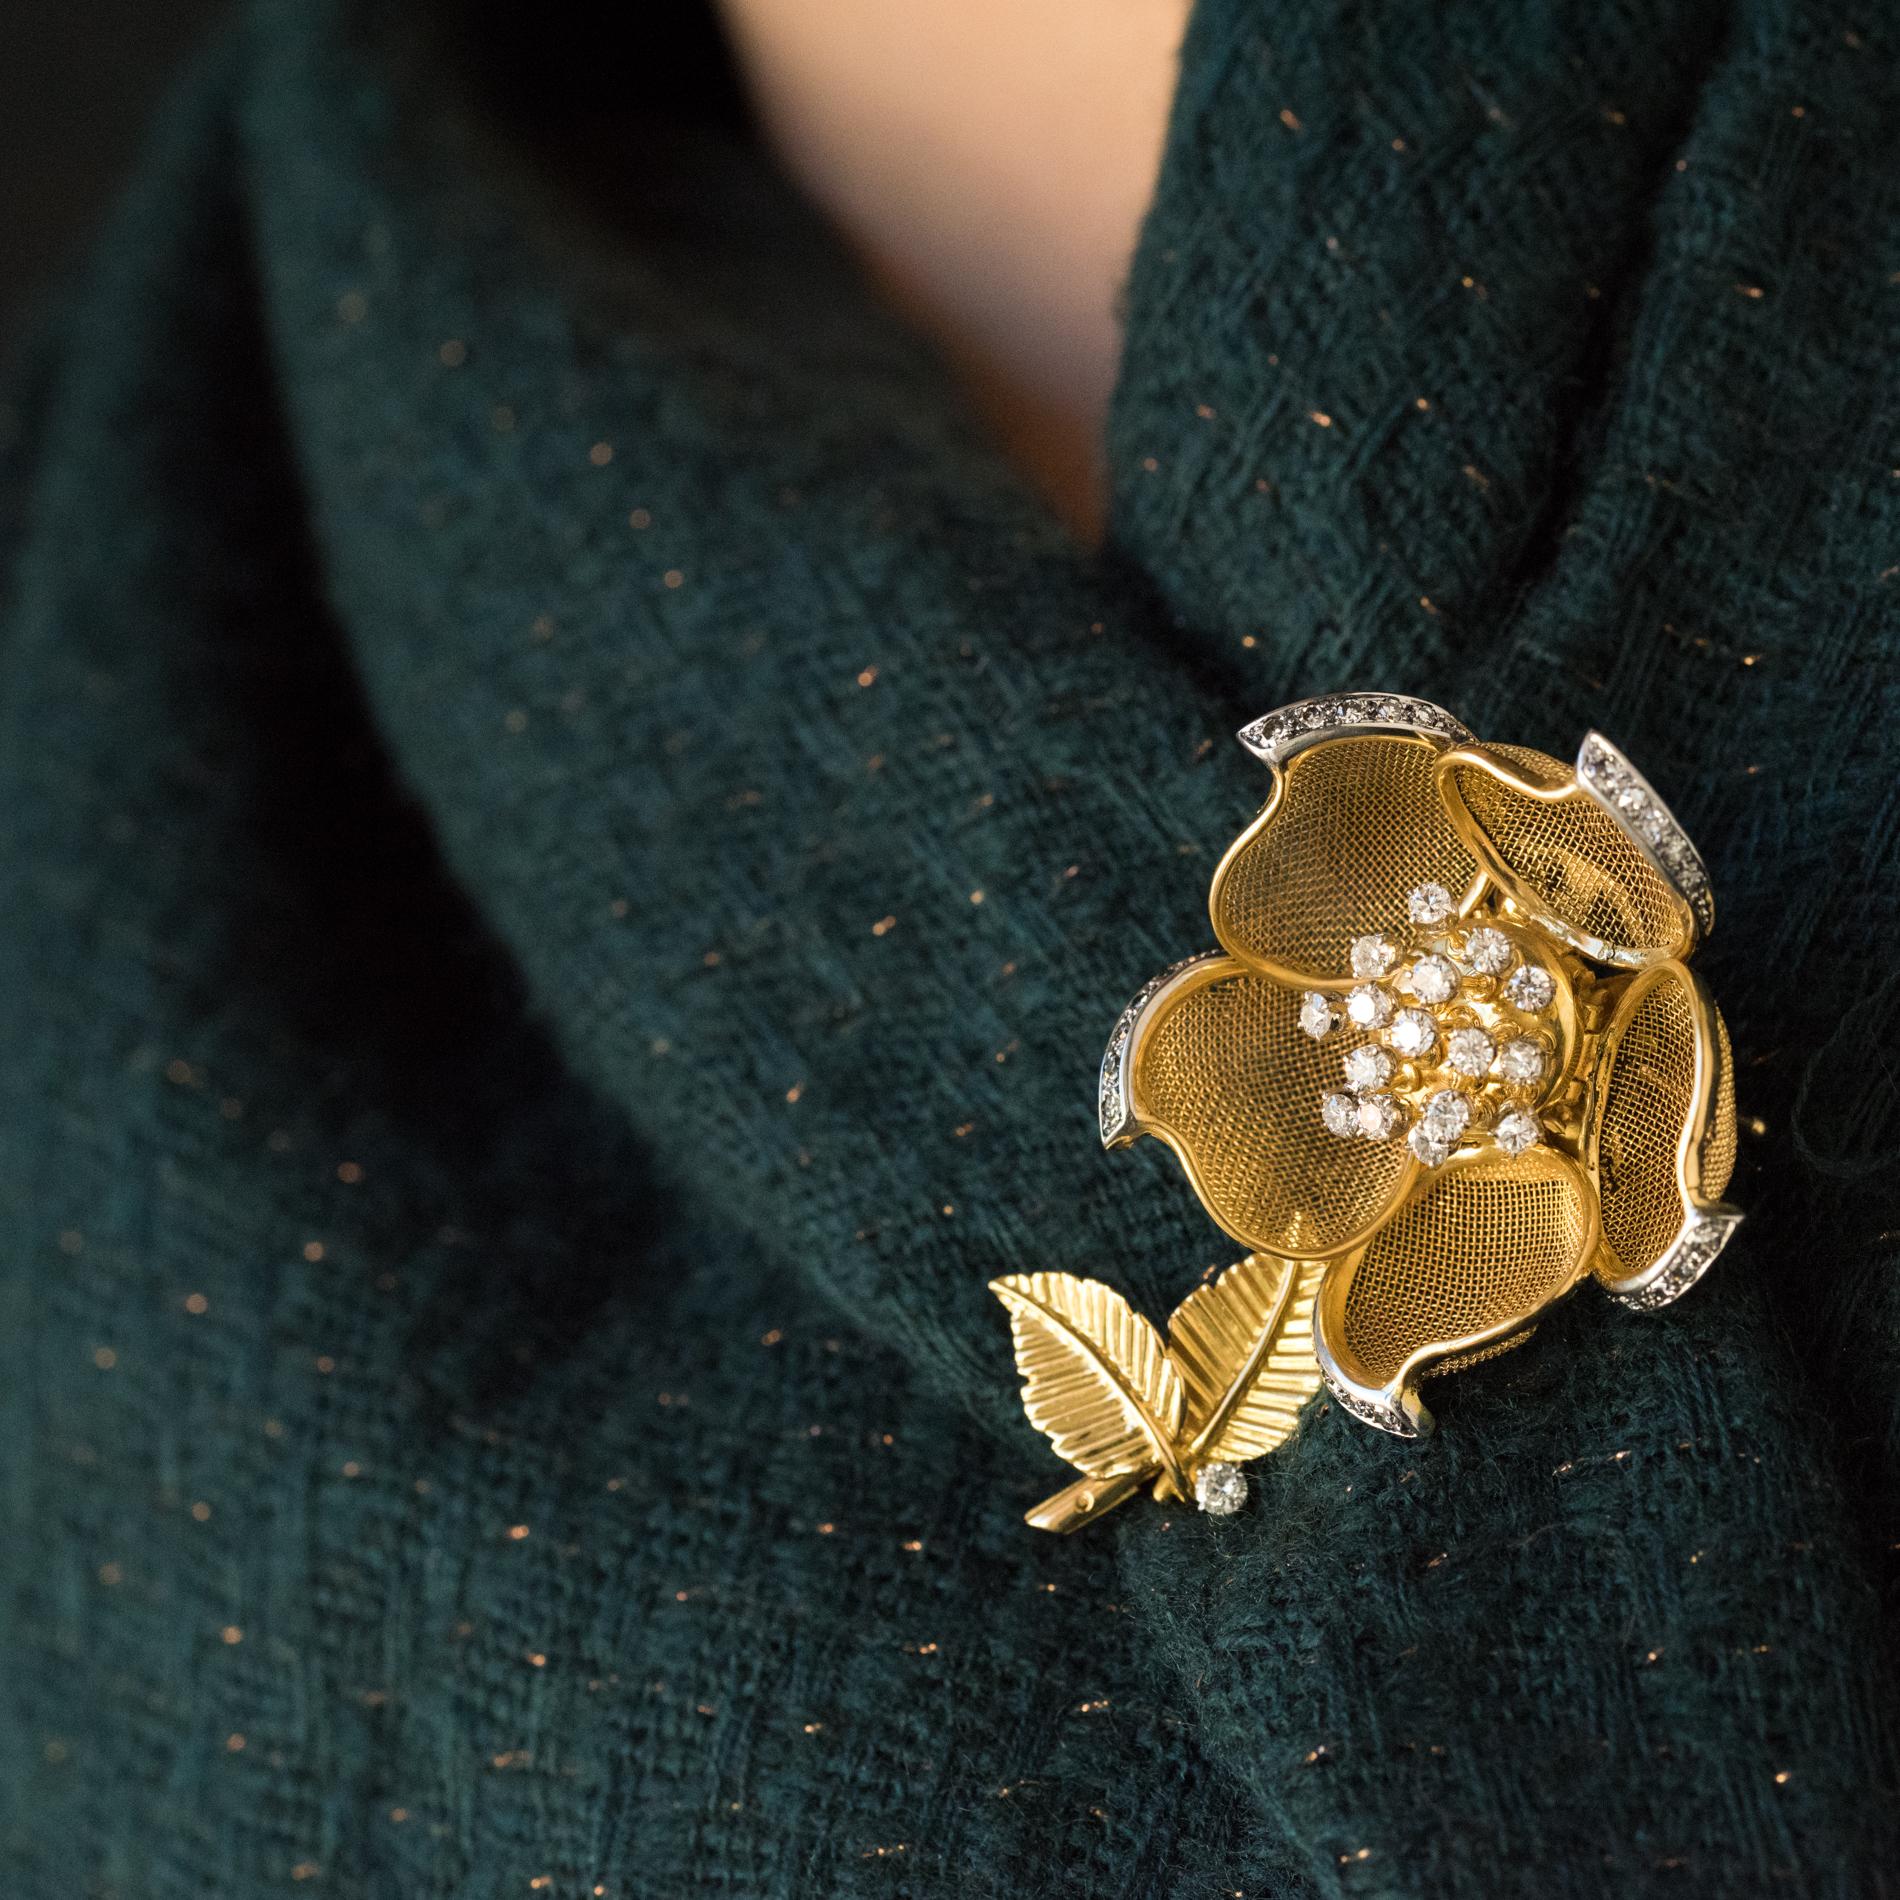 Brooch in 18 karats yellow gold, mercury head hallmark and platinum, young girl's head hallmark.
Representing a rose, this vintage brooch is articulated and can thus present the flower open or closed in bud. The pistils are formed of movable golden